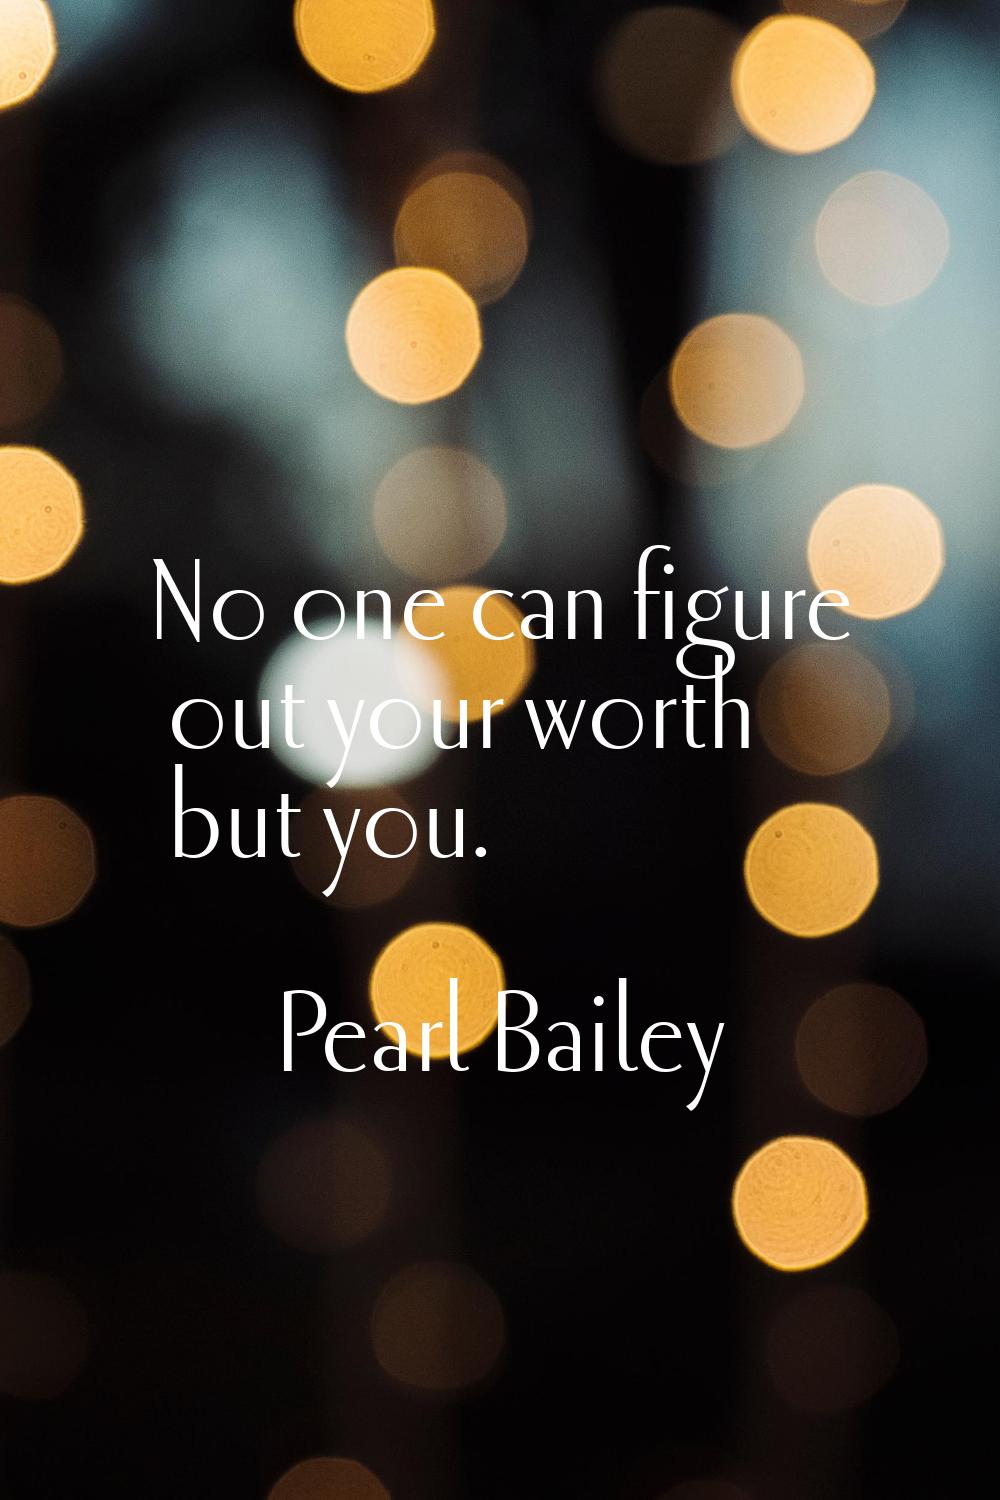 No one can figure out your worth but you.